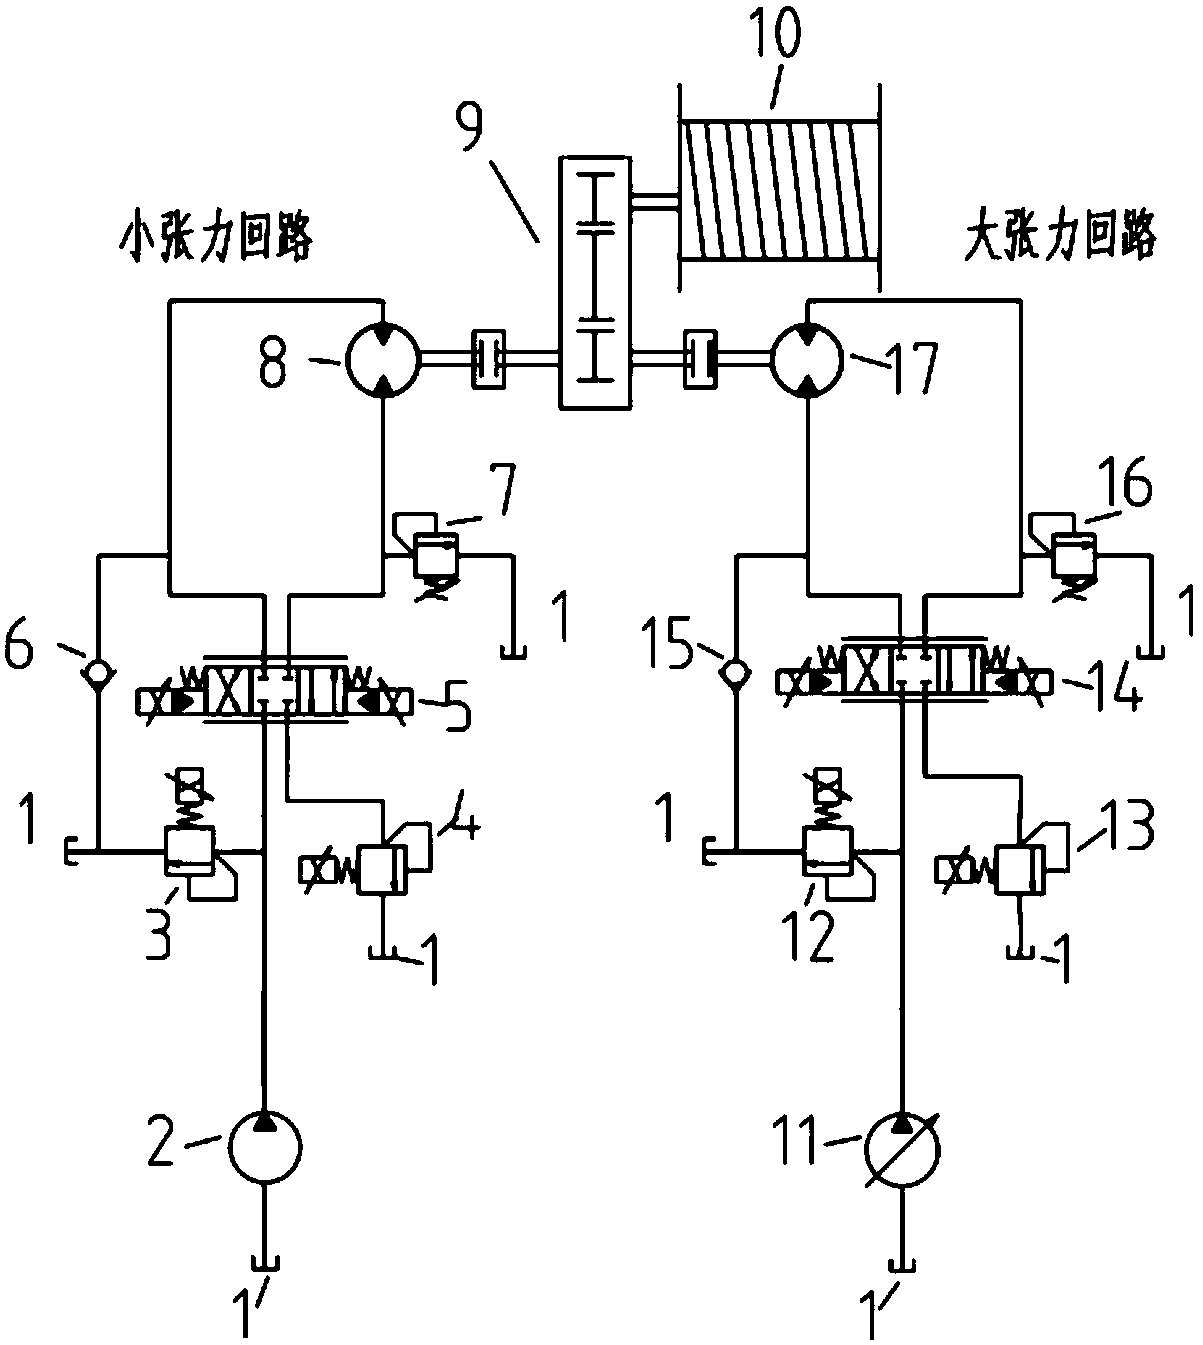 A hydraulic control system and method of tension winch